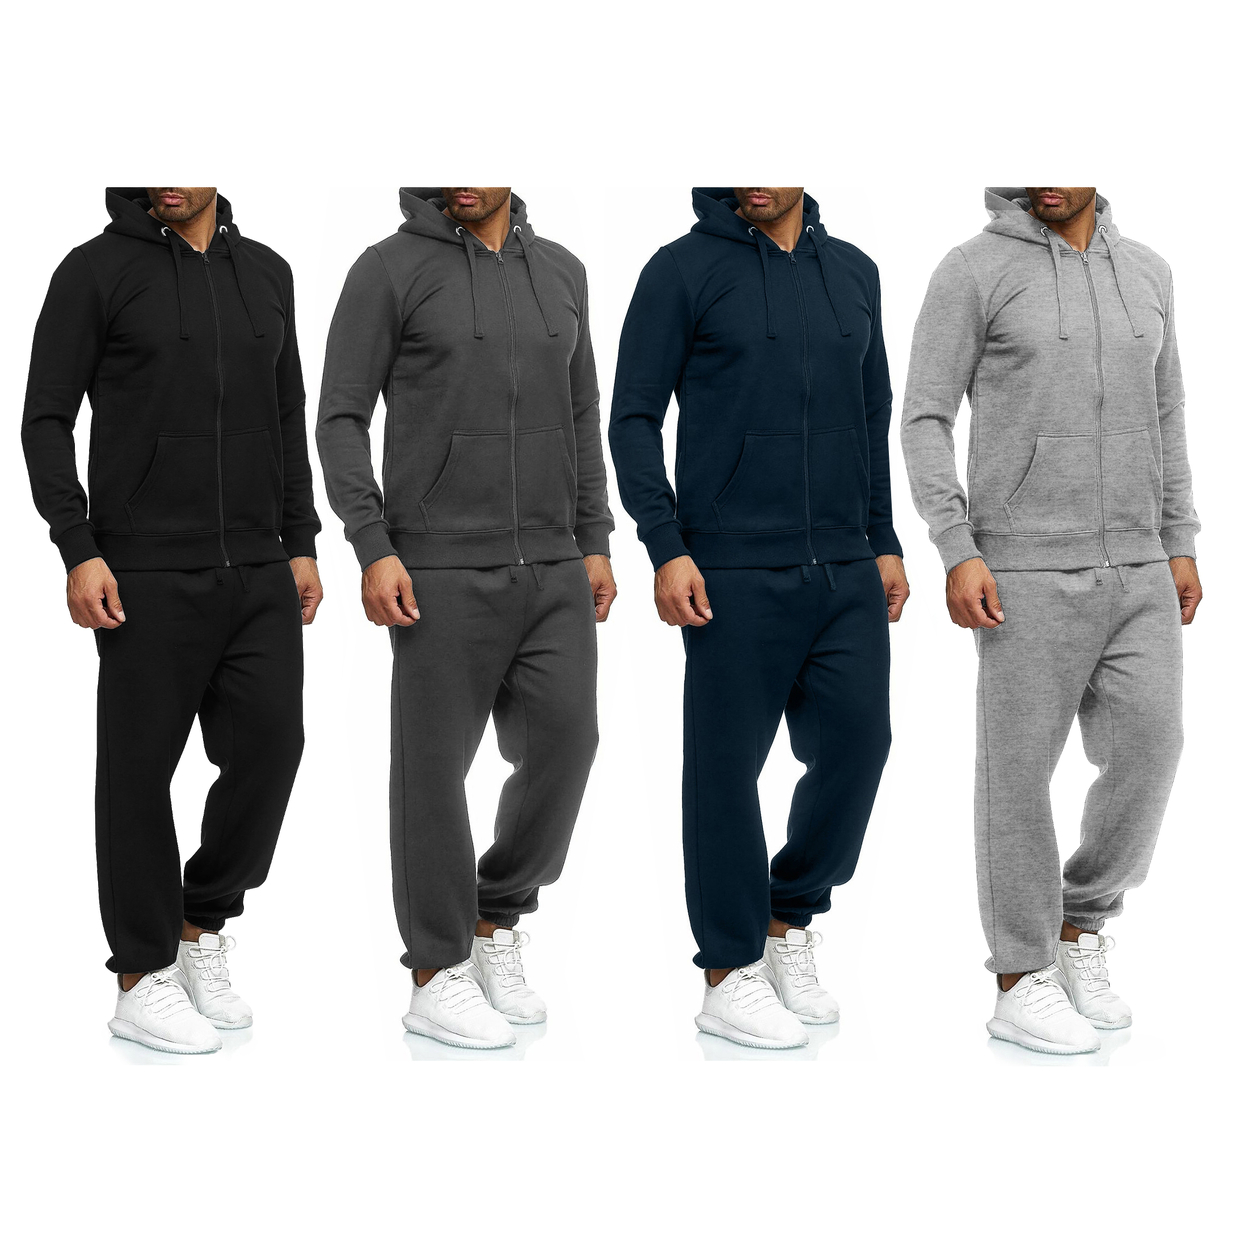 Multi-Pack: Men's Casual Big & Tall Athletic Active Winter Warm Fleece Lined Full Zip Tracksuit Jogger Set - Grey, 1-pack, X-large